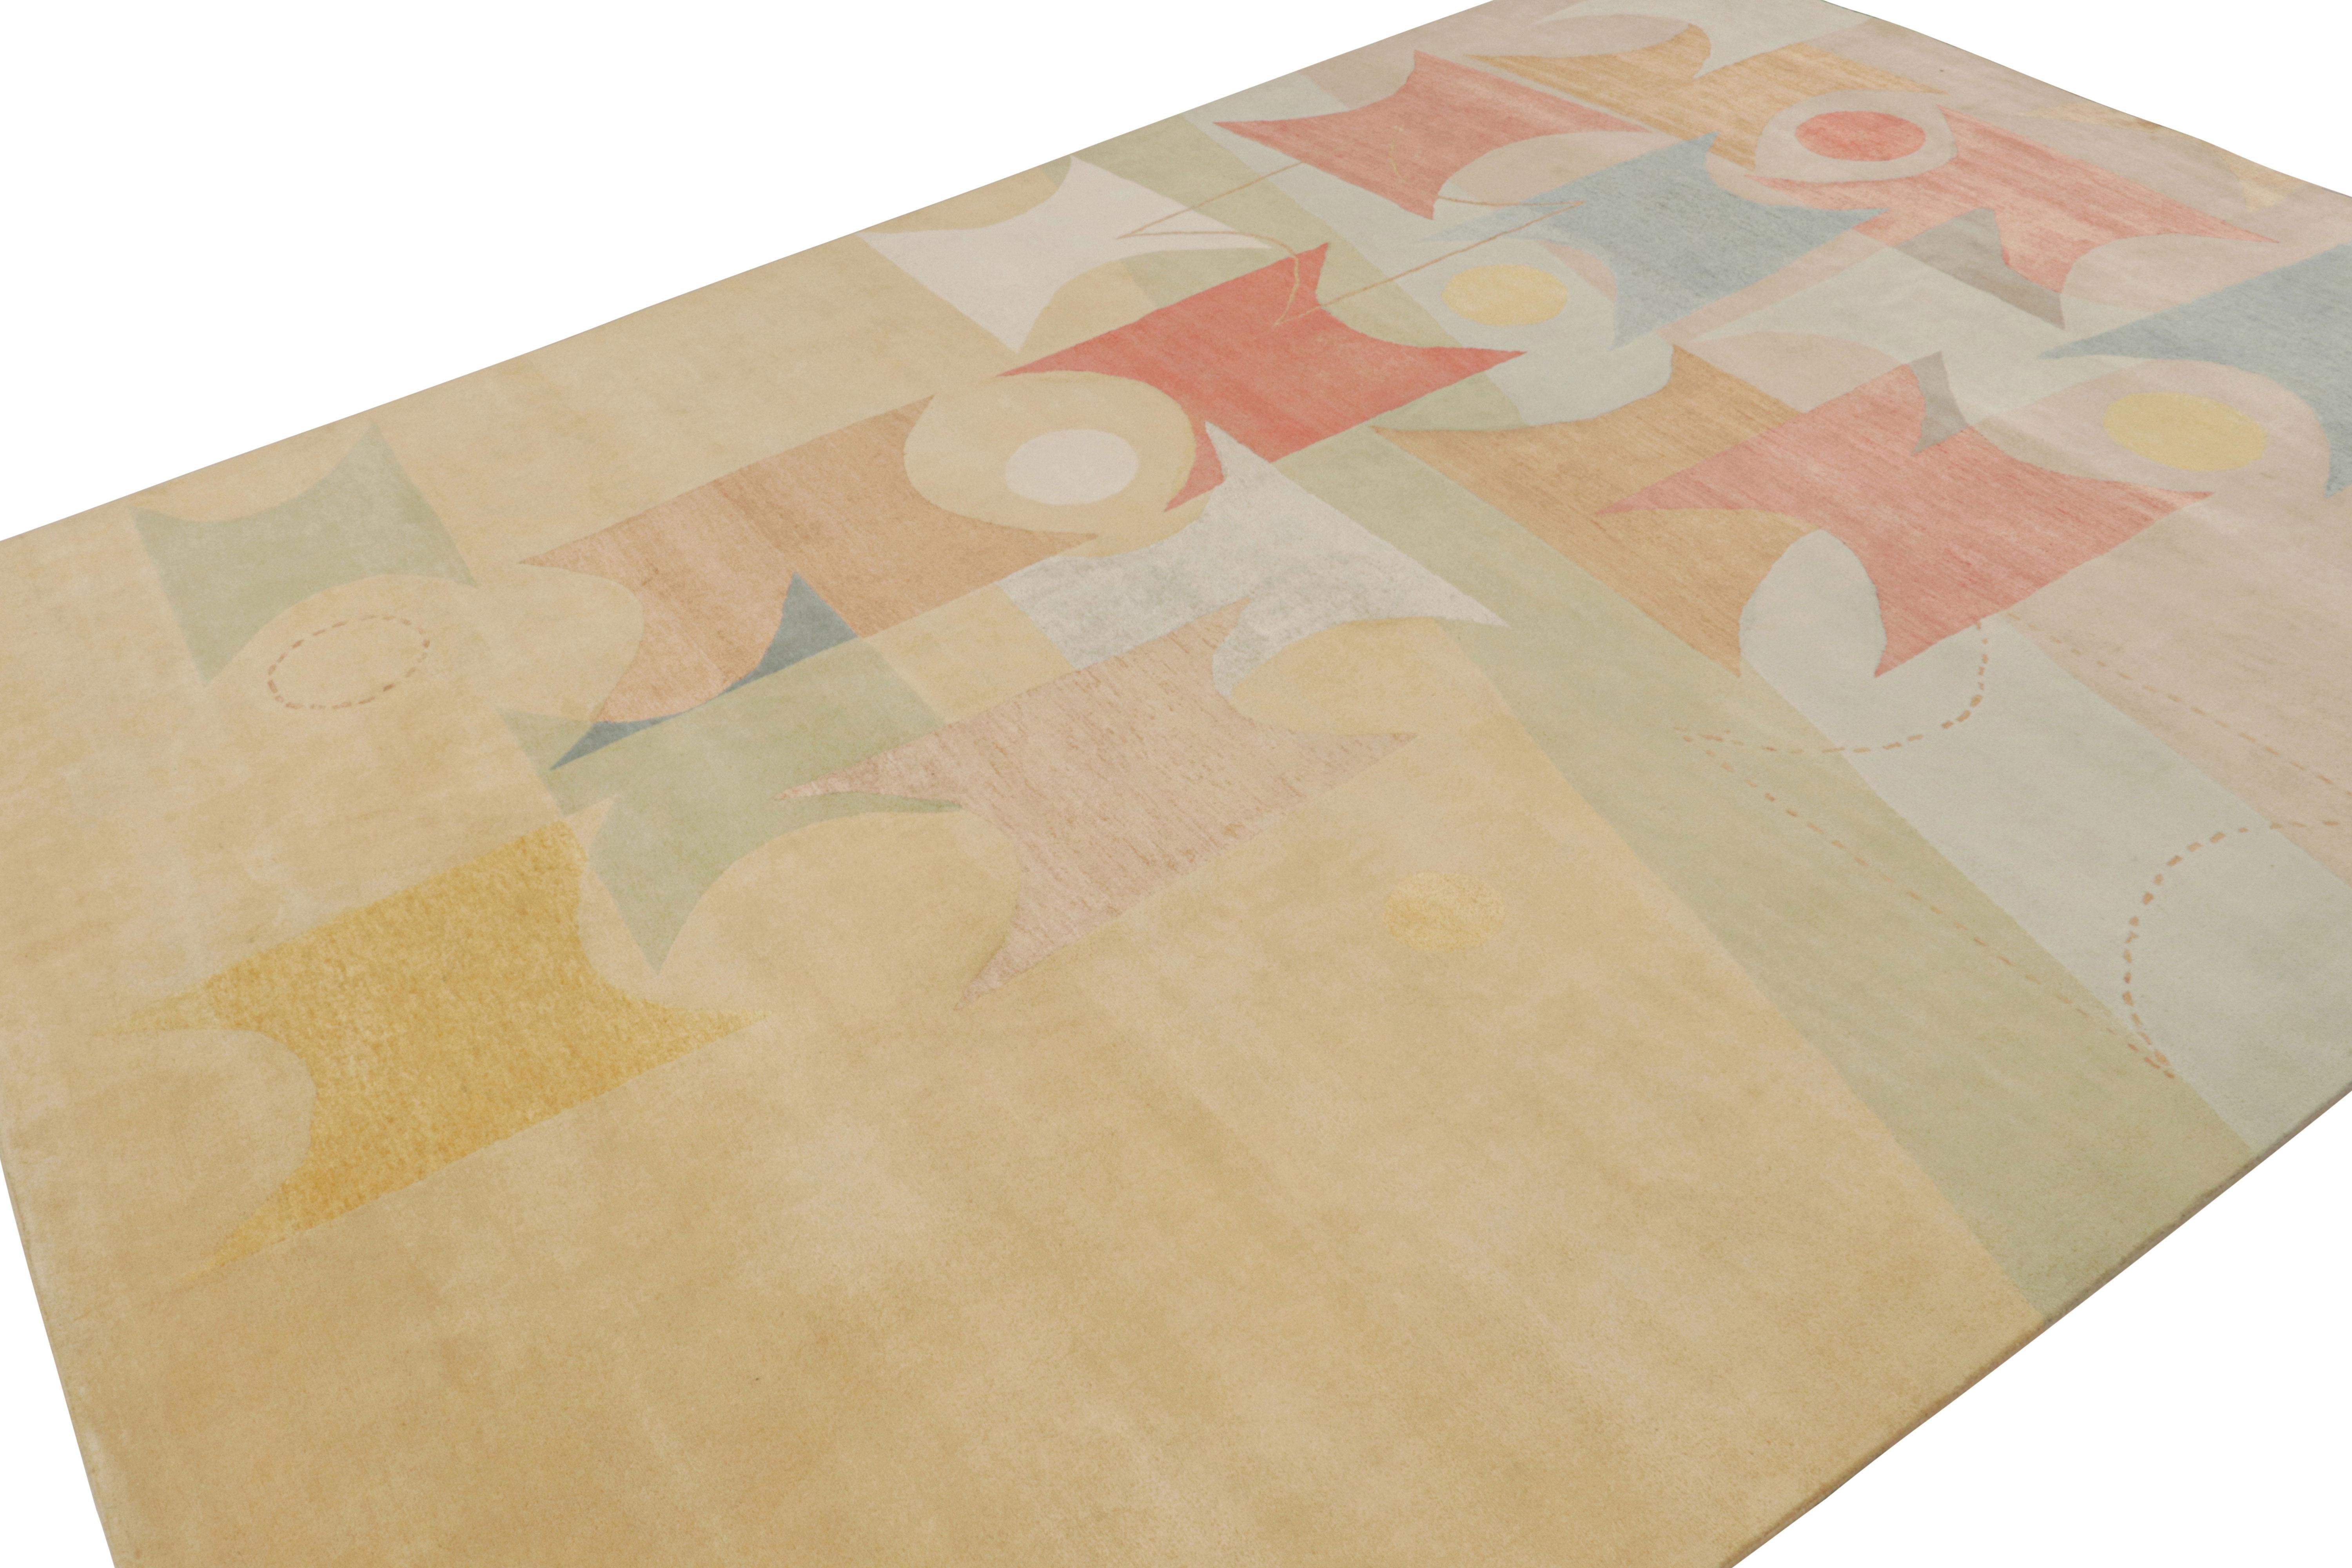 This 9x12 rug is from Rug & Kilim’s Mid-Century Modern collection in collaboration with Jenn Ski - hand-knotted in wool and silk

On the Design:

Keen eyes will admire colorful jewel-tone pastels underscore geometric patterns in the atomic age